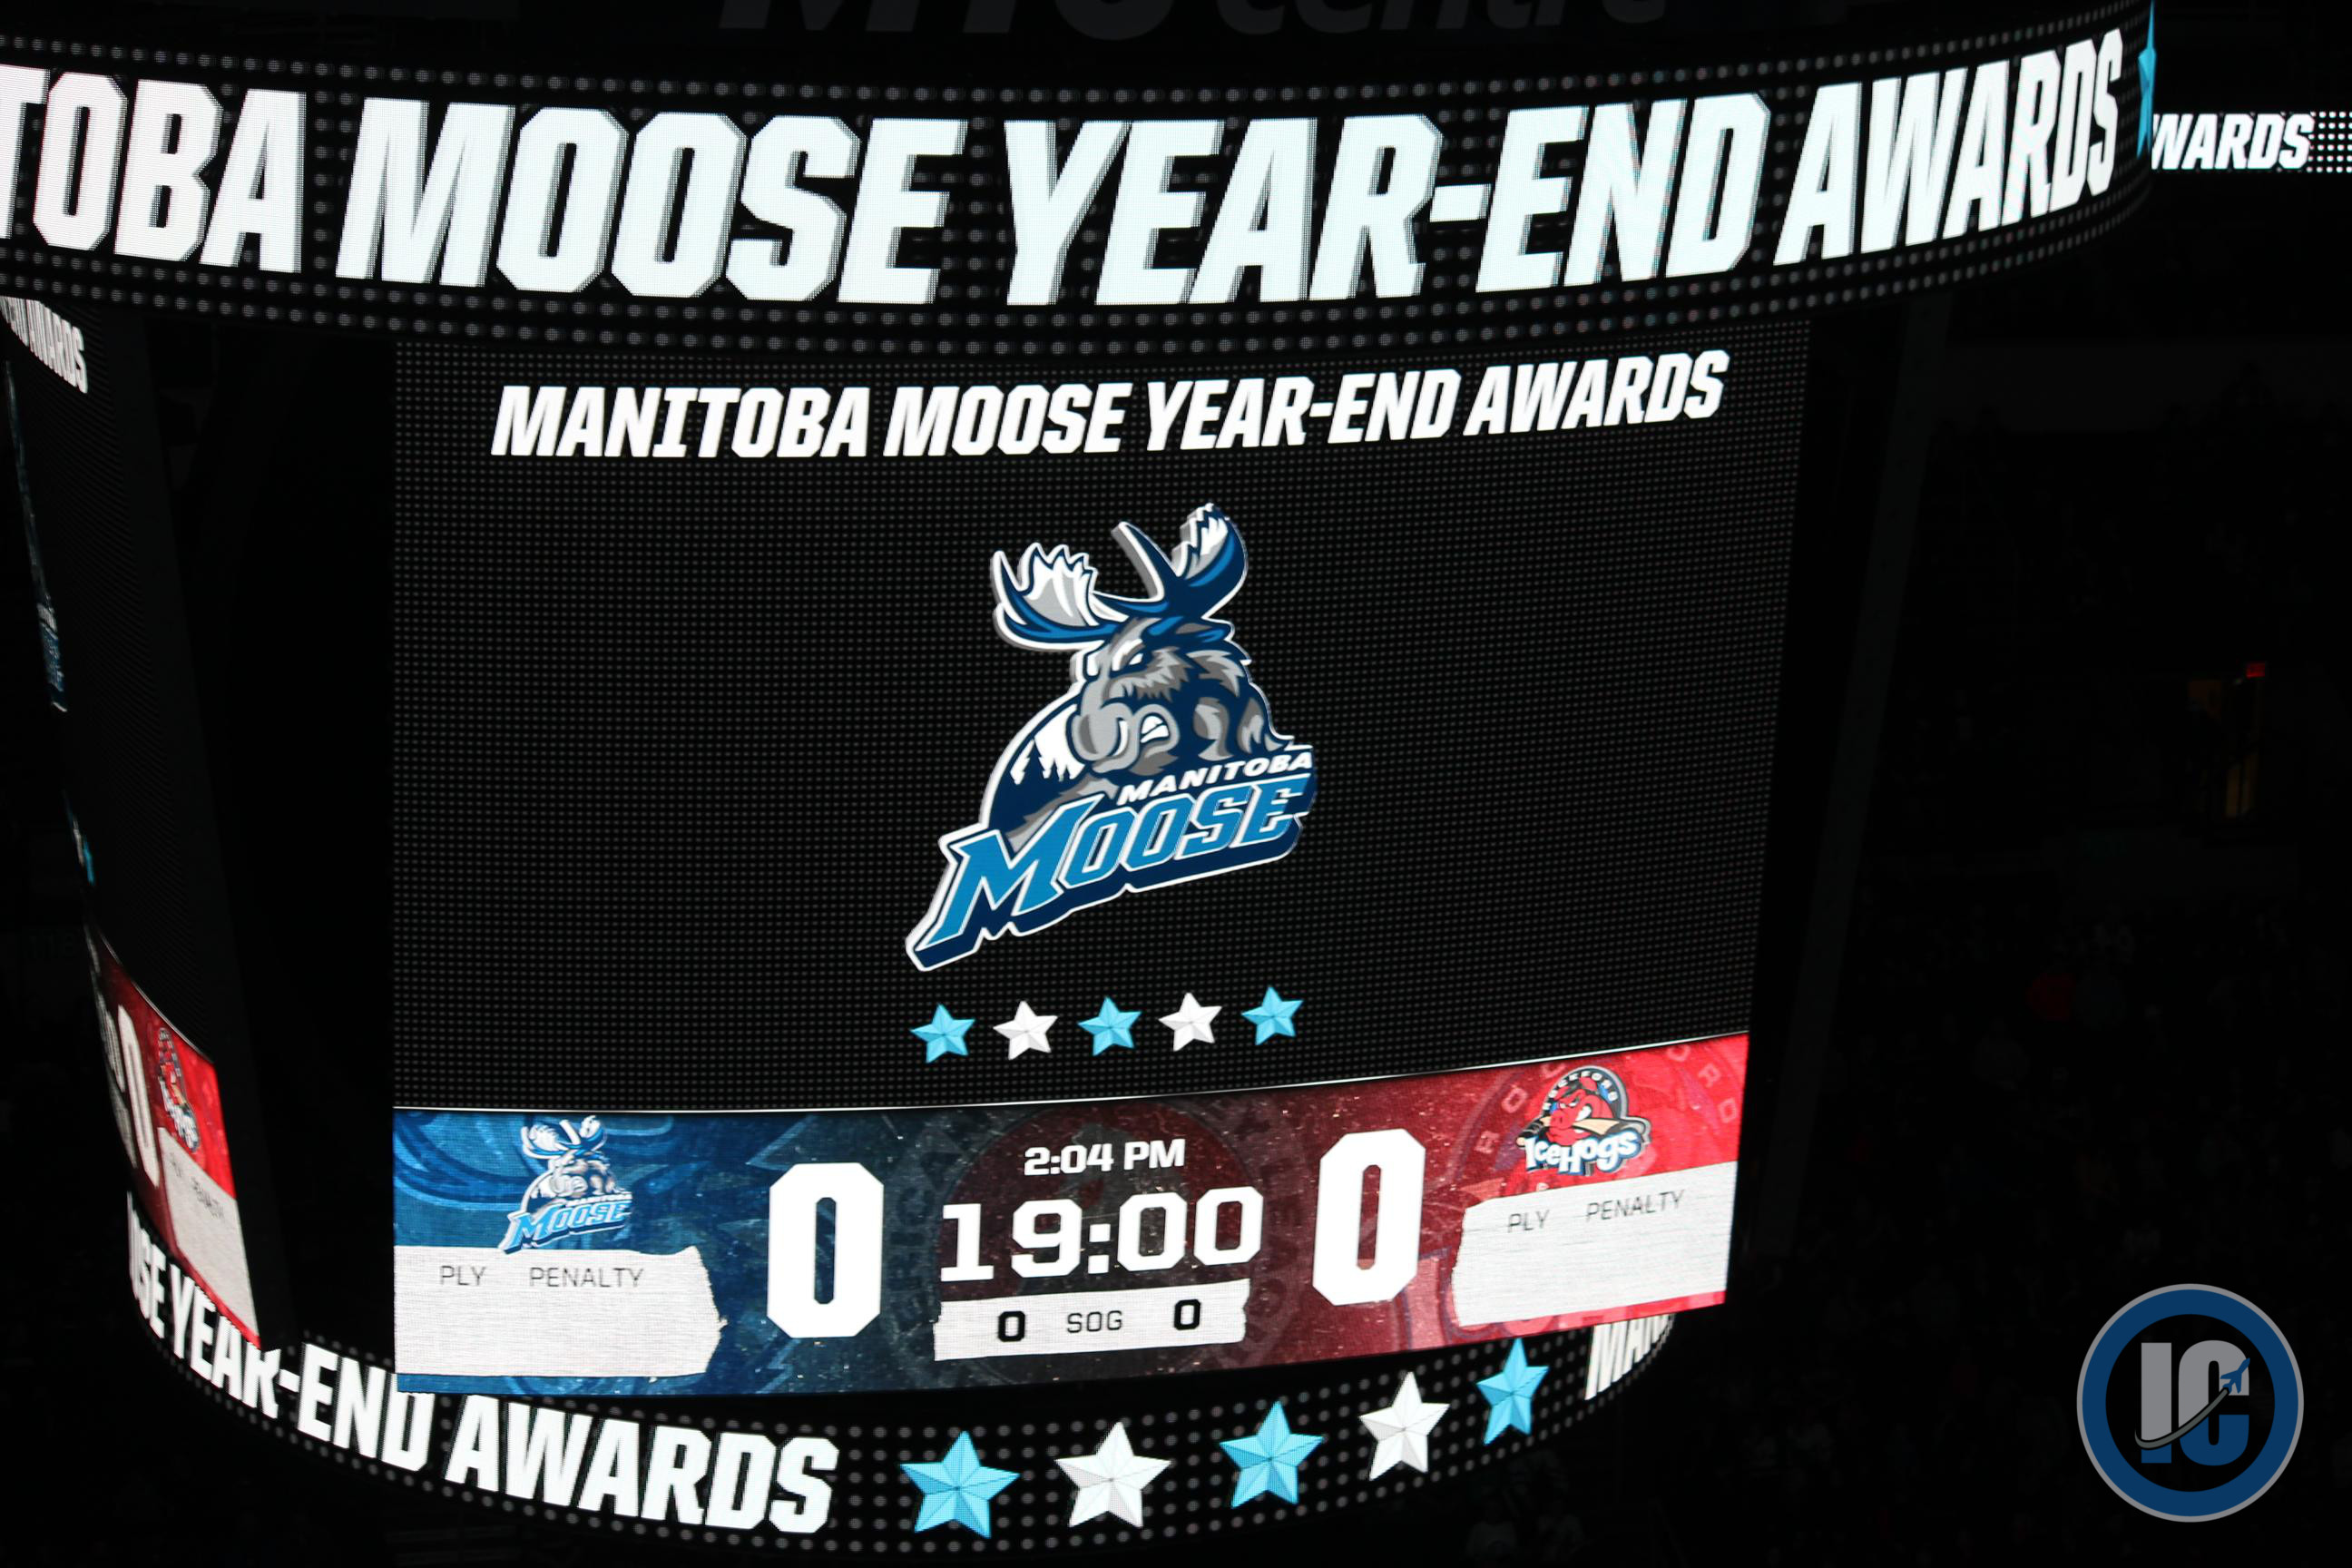 Moose end of year awards